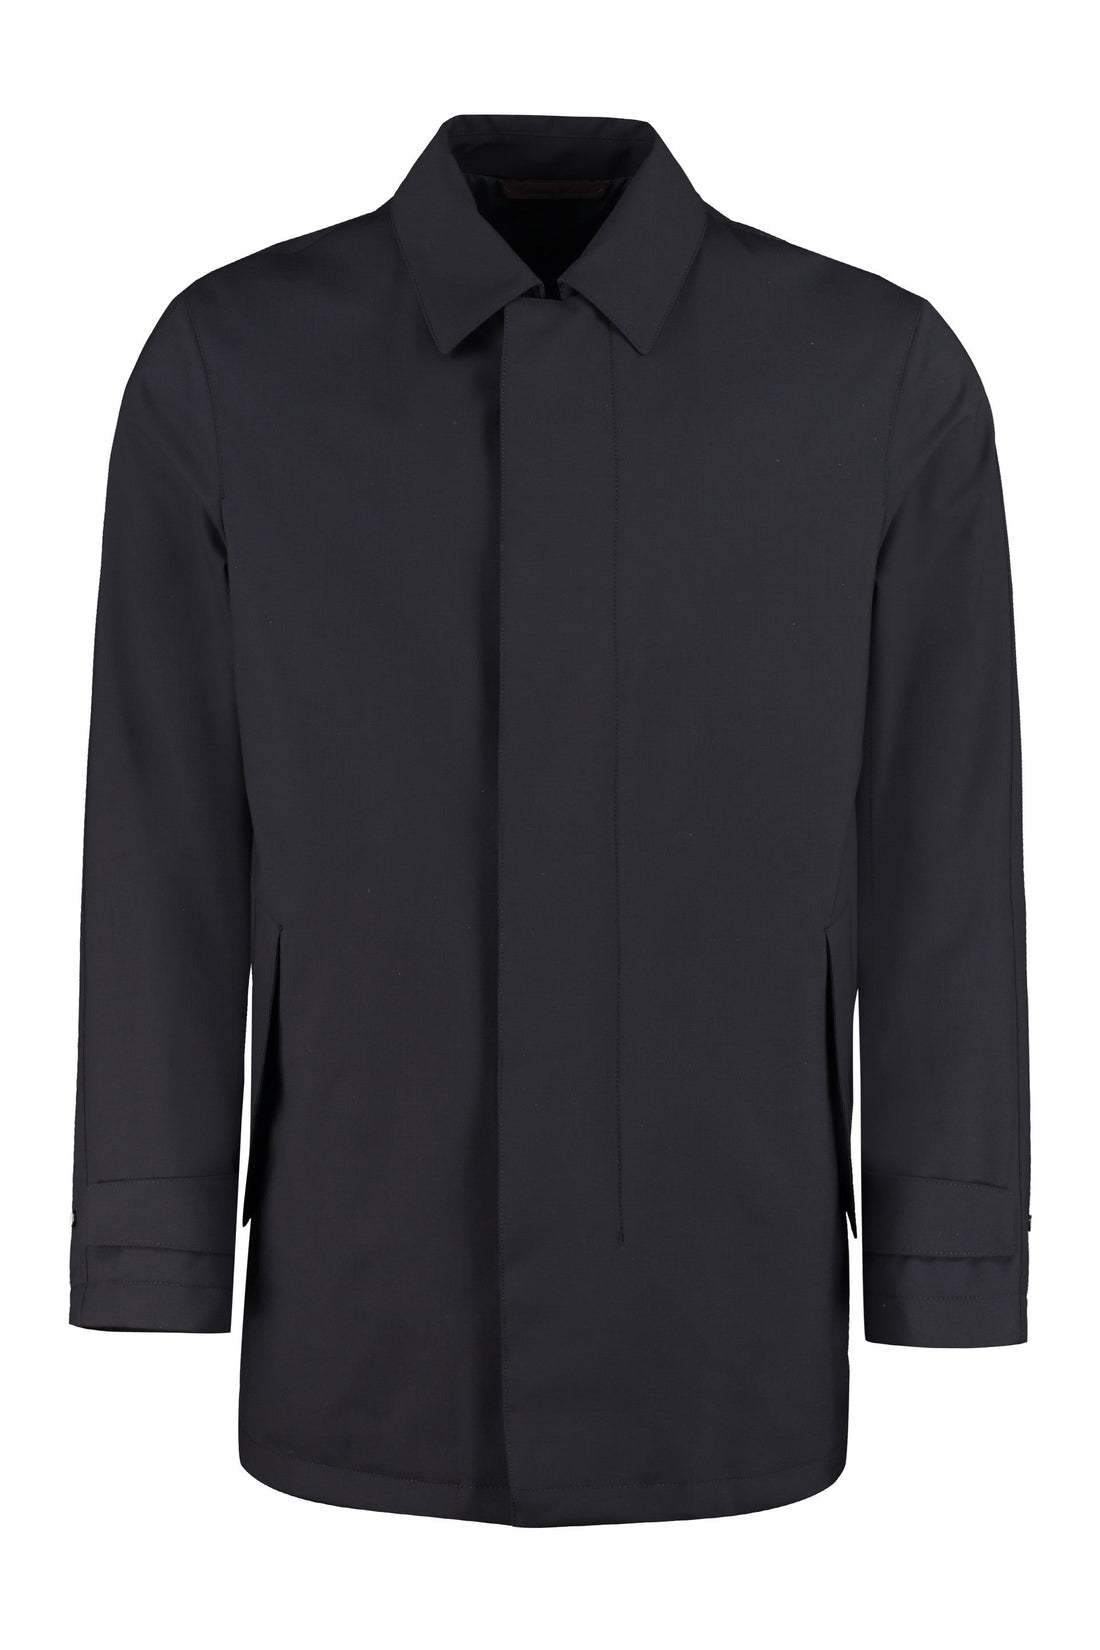 Zegna-OUTLET-SALE-Jacket with zip and button fastening-ARCHIVIST